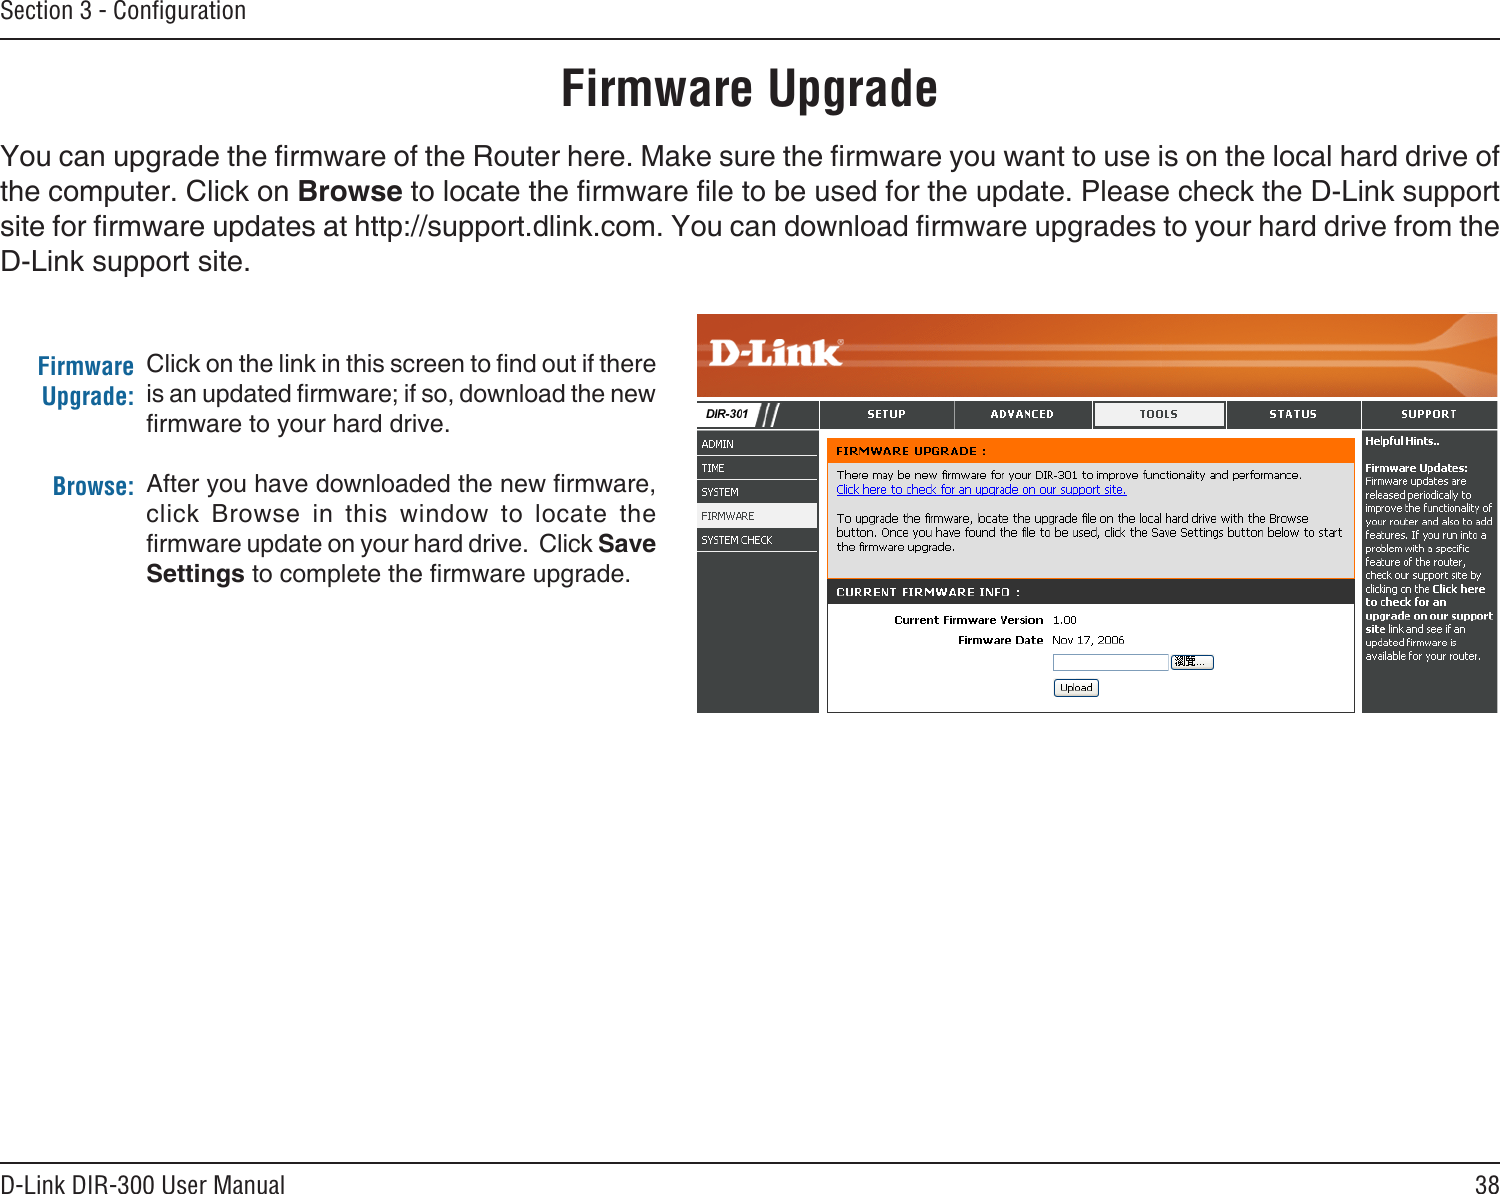 38D-Link DIR-300 User ManualSection 3 - ConﬁgurationFirmware UpgradeClick on the link in this screen to nd out if there is an updated rmware; if so, download the new rmware to your hard drive.After you have downloaded the new rmware, click  Browse  in  this  window  to  locate  the rmware update on your hard drive.  Click Save Settings to complete the rmware upgrade.Firmware Upgrade:Browse:You can upgrade the rmware of the Router here. Make sure the rmware you want to use is on the local hard drive of the computer. Click on Browse to locate the rmware le to be used for the update. Please check the D-Link support site for rmware updates at http://support.dlink.com. You can download rmware upgrades to your hard drive from the D-Link support site.